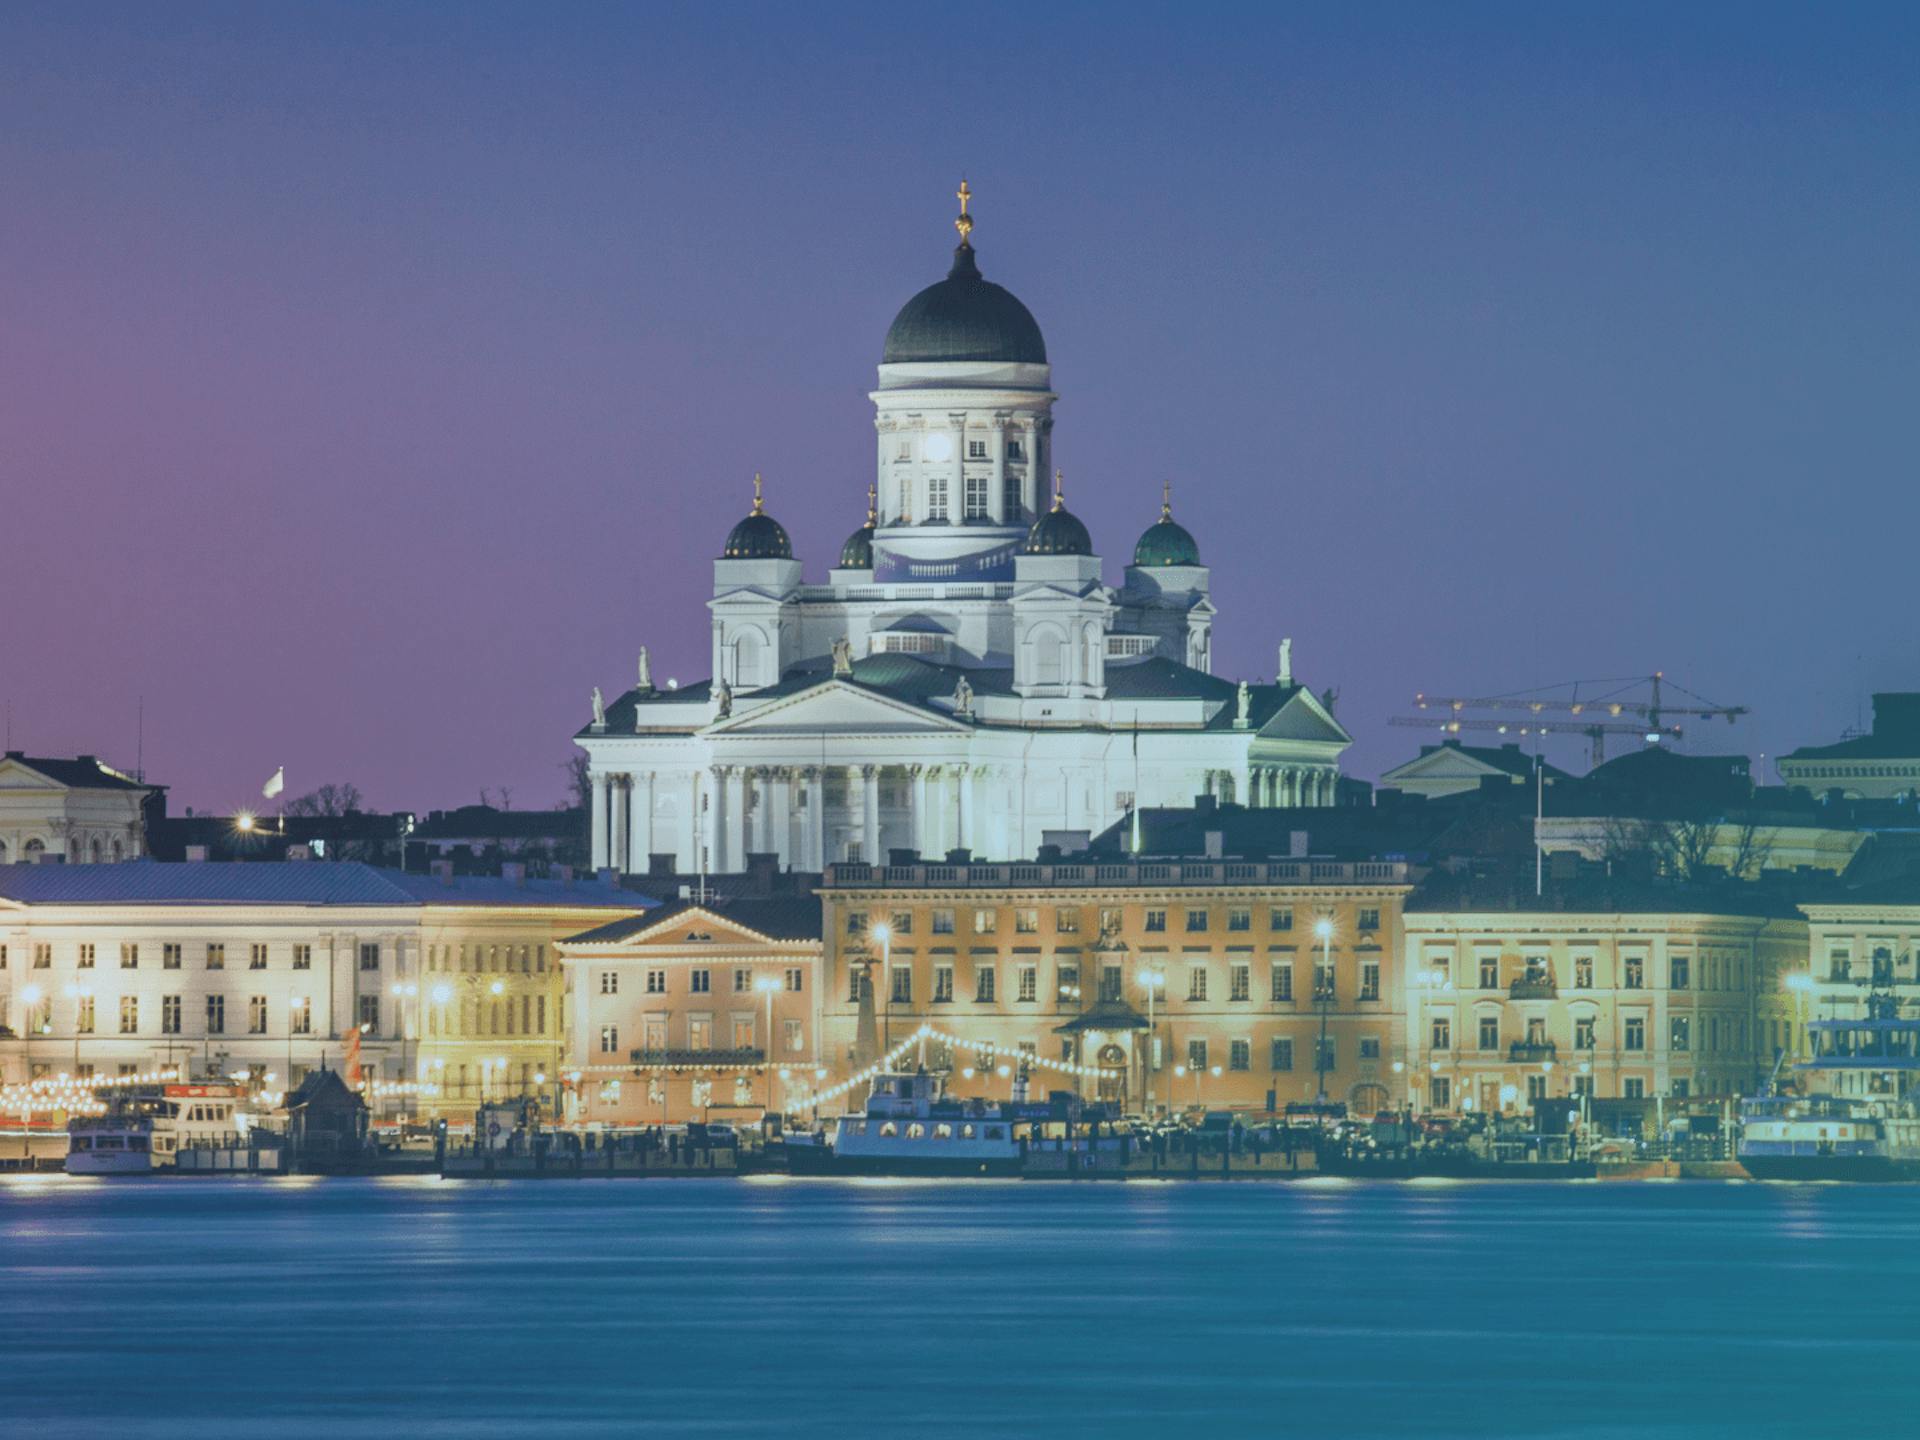 Helsinki, the capital of Finland, is located along the Gulf of Finland on the southern coast of the country. 